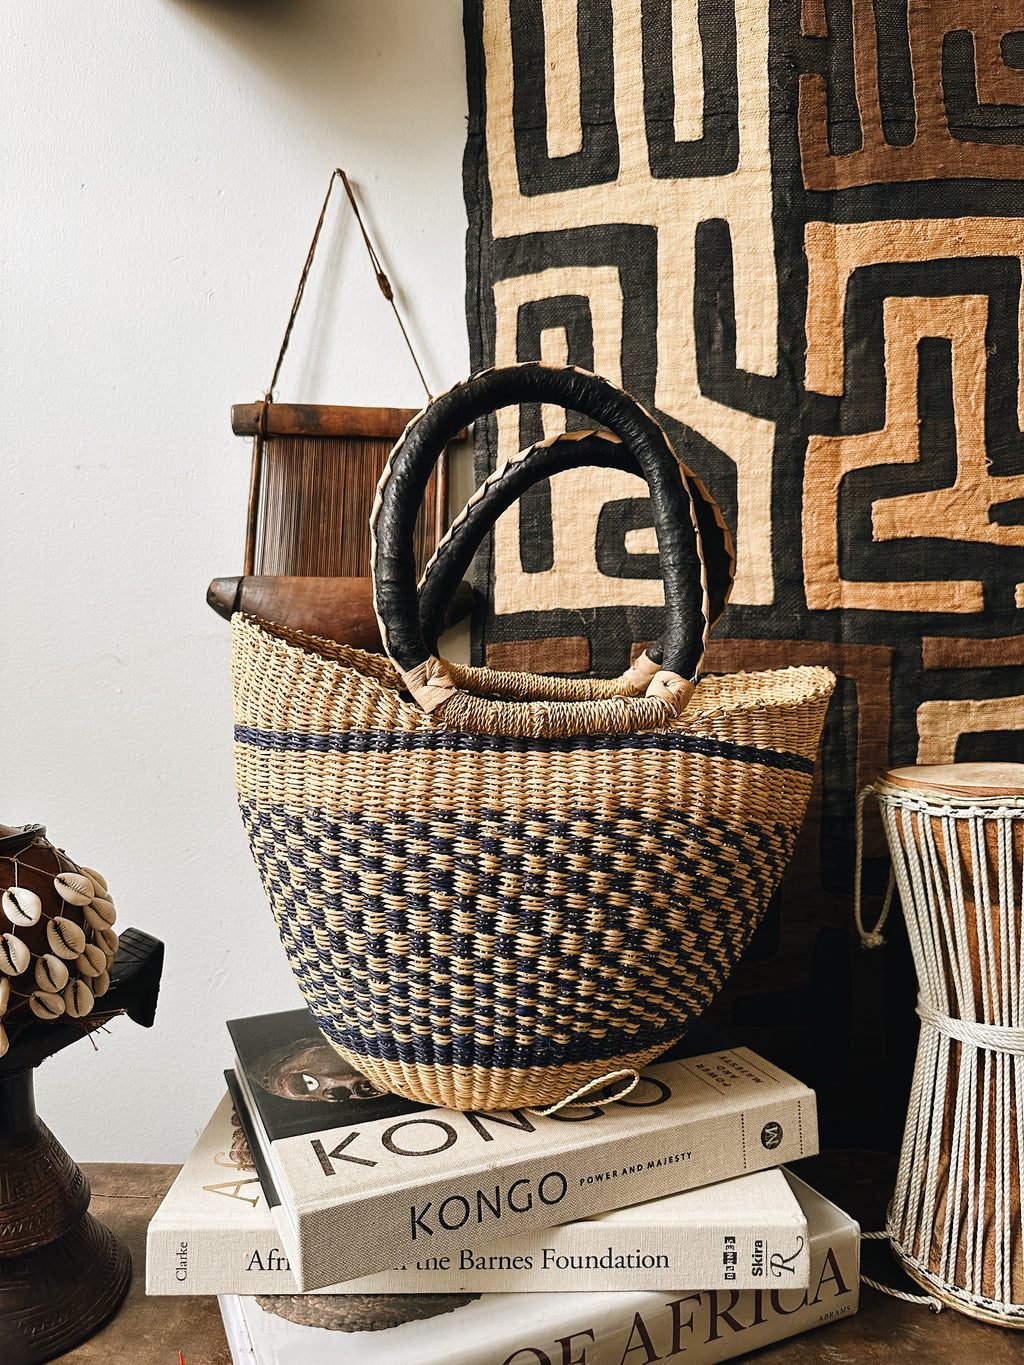 Small Woven African Tote Basket #1